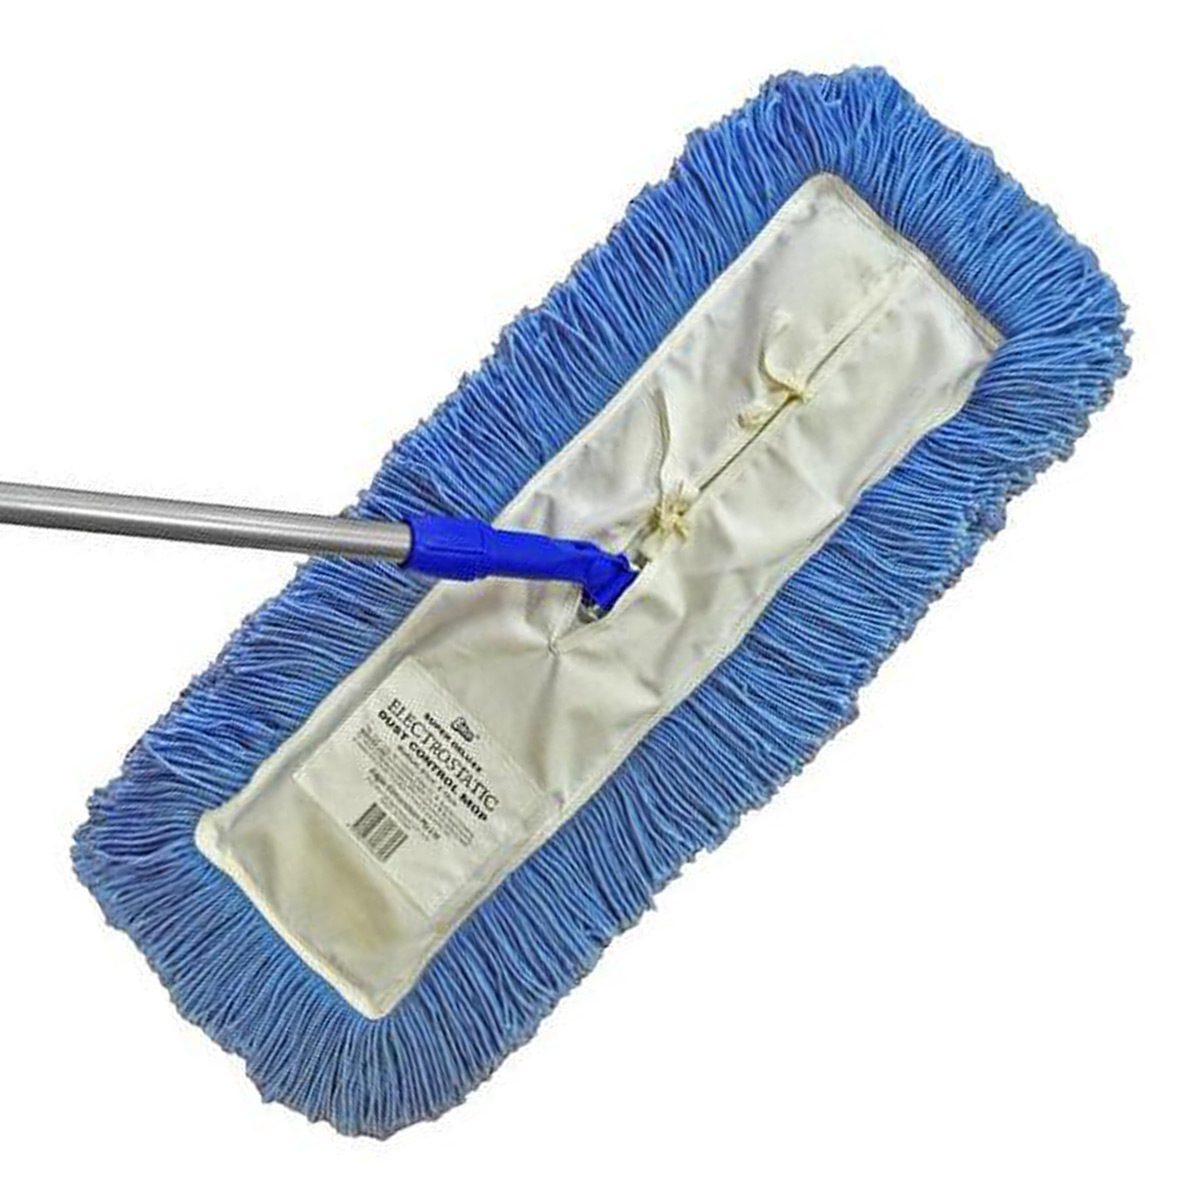 cleaning-equipment-mops-eco-dust-control-swivel-head-and-handle-91cm-superior mod-acrylic-fringe-strong-metal-frame-tech-swivel-fitting-25mm-powder-coated-handle-vjs-distributors-ED32022